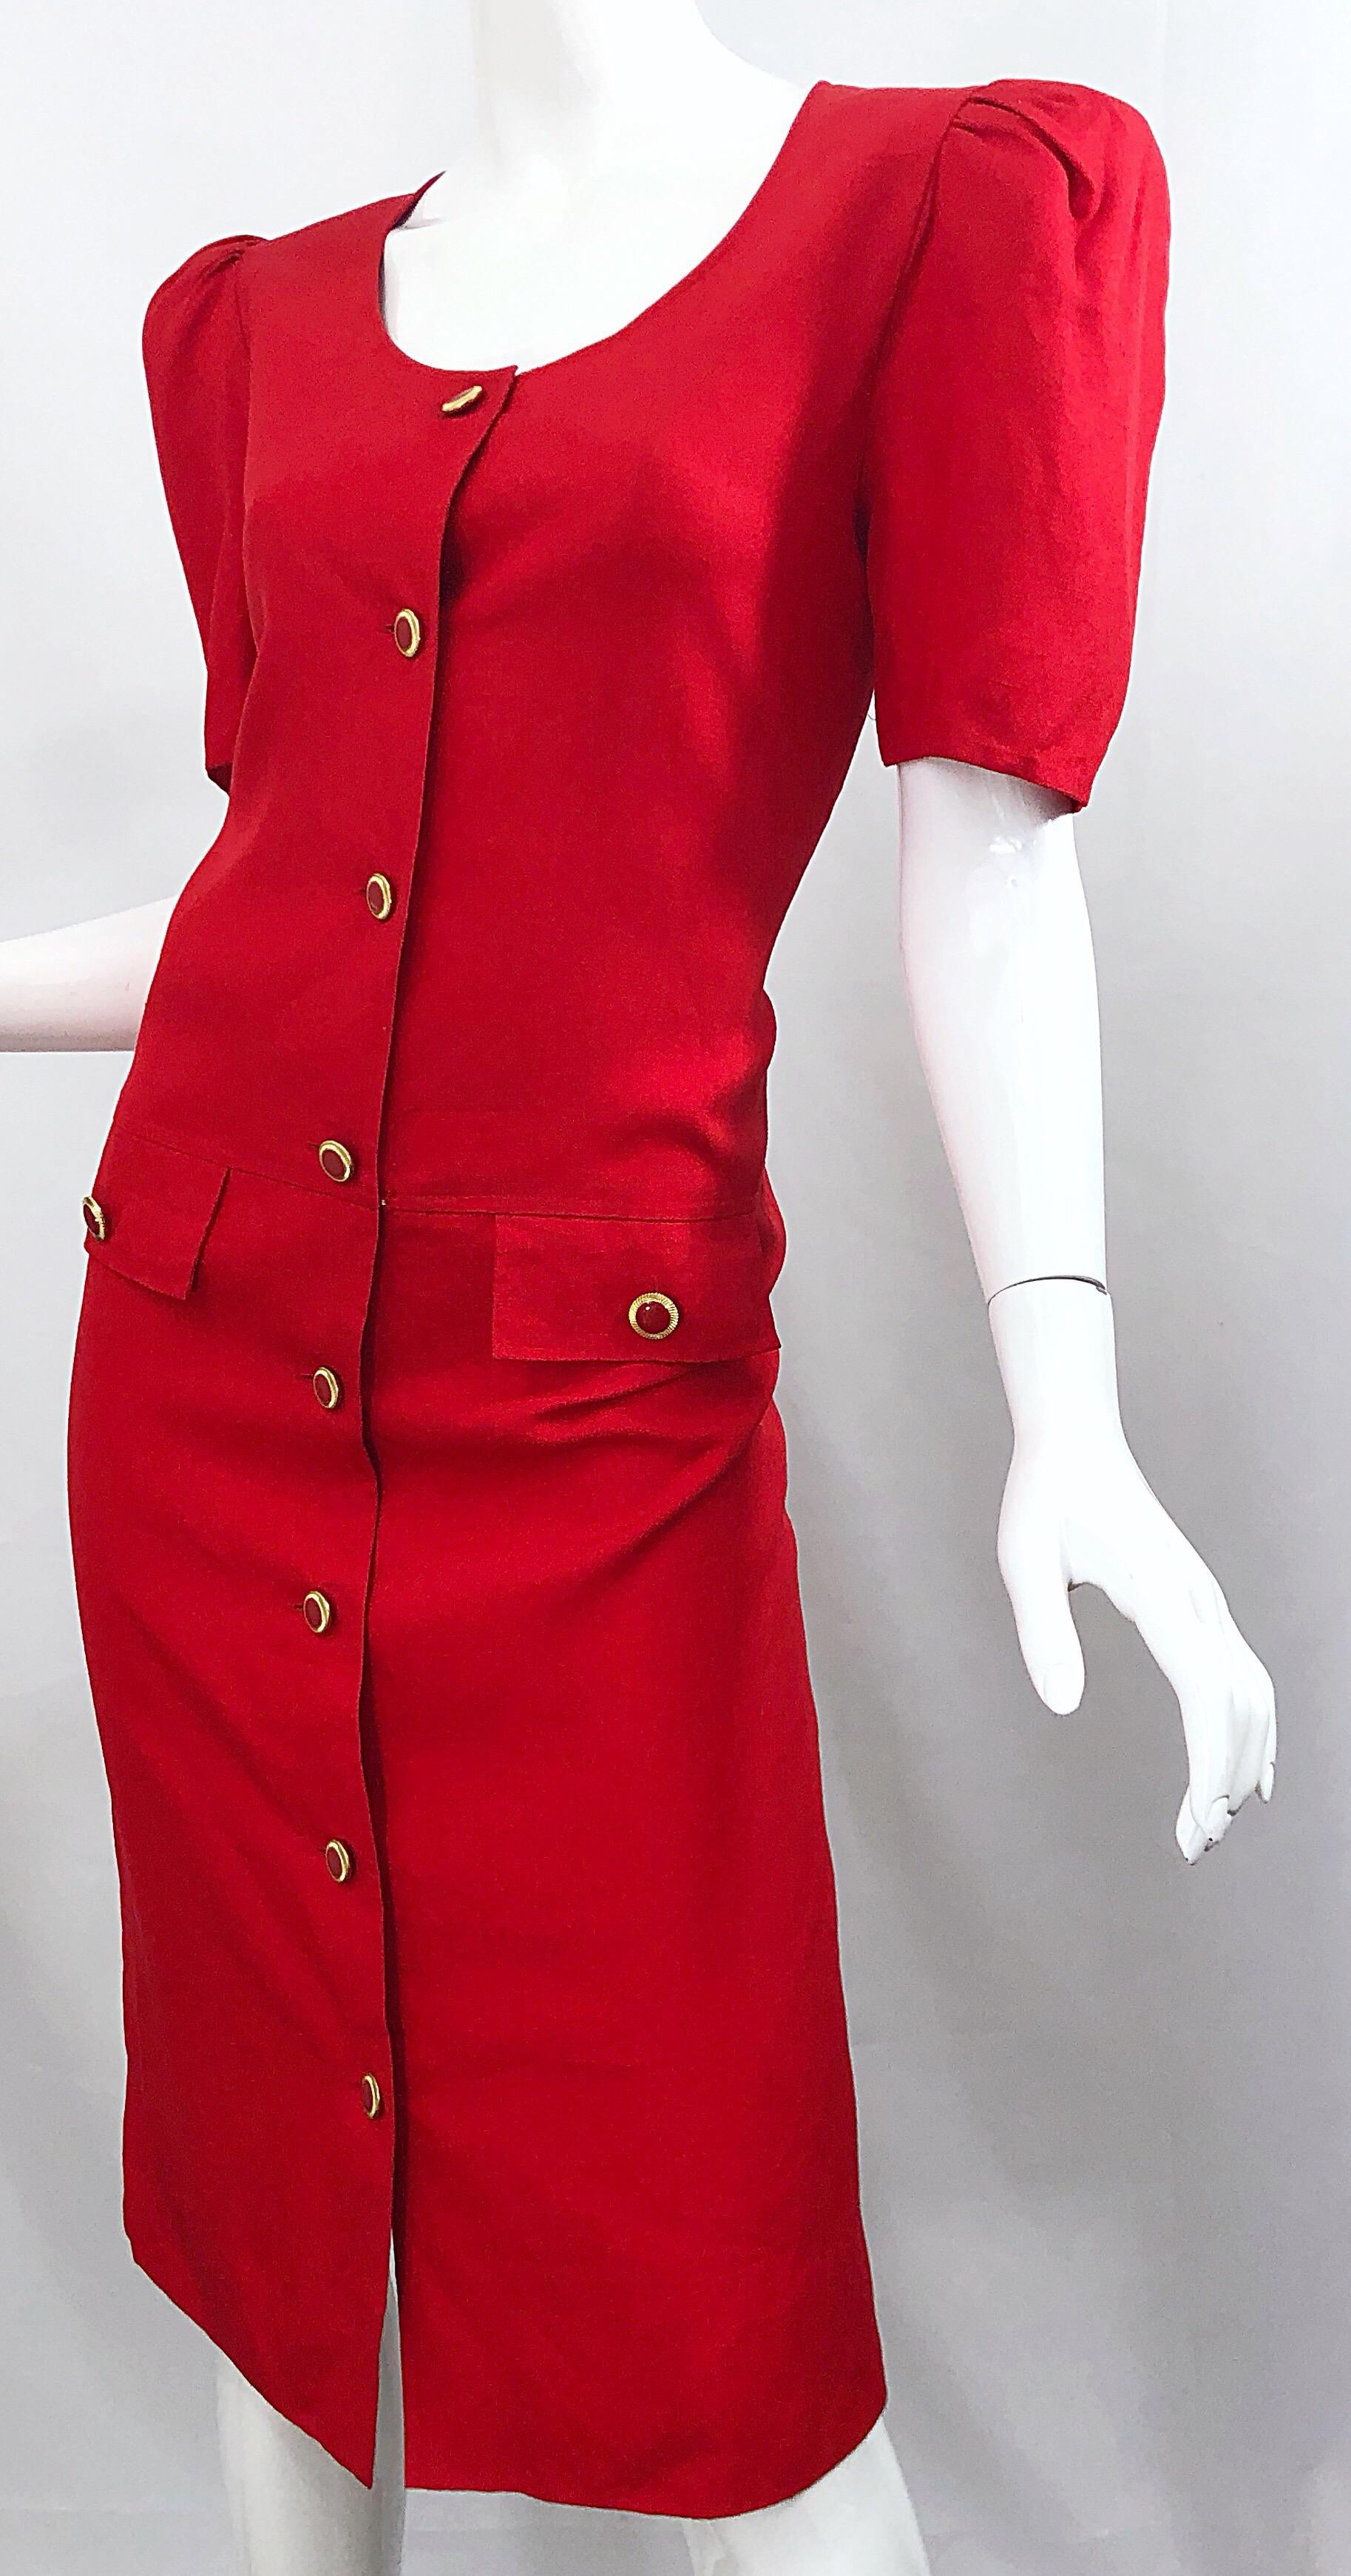 Vintage Adele Simpson I Magnin 1980s Size 10 Lipstick Red Linen Rayon 90s Dress For Sale 5